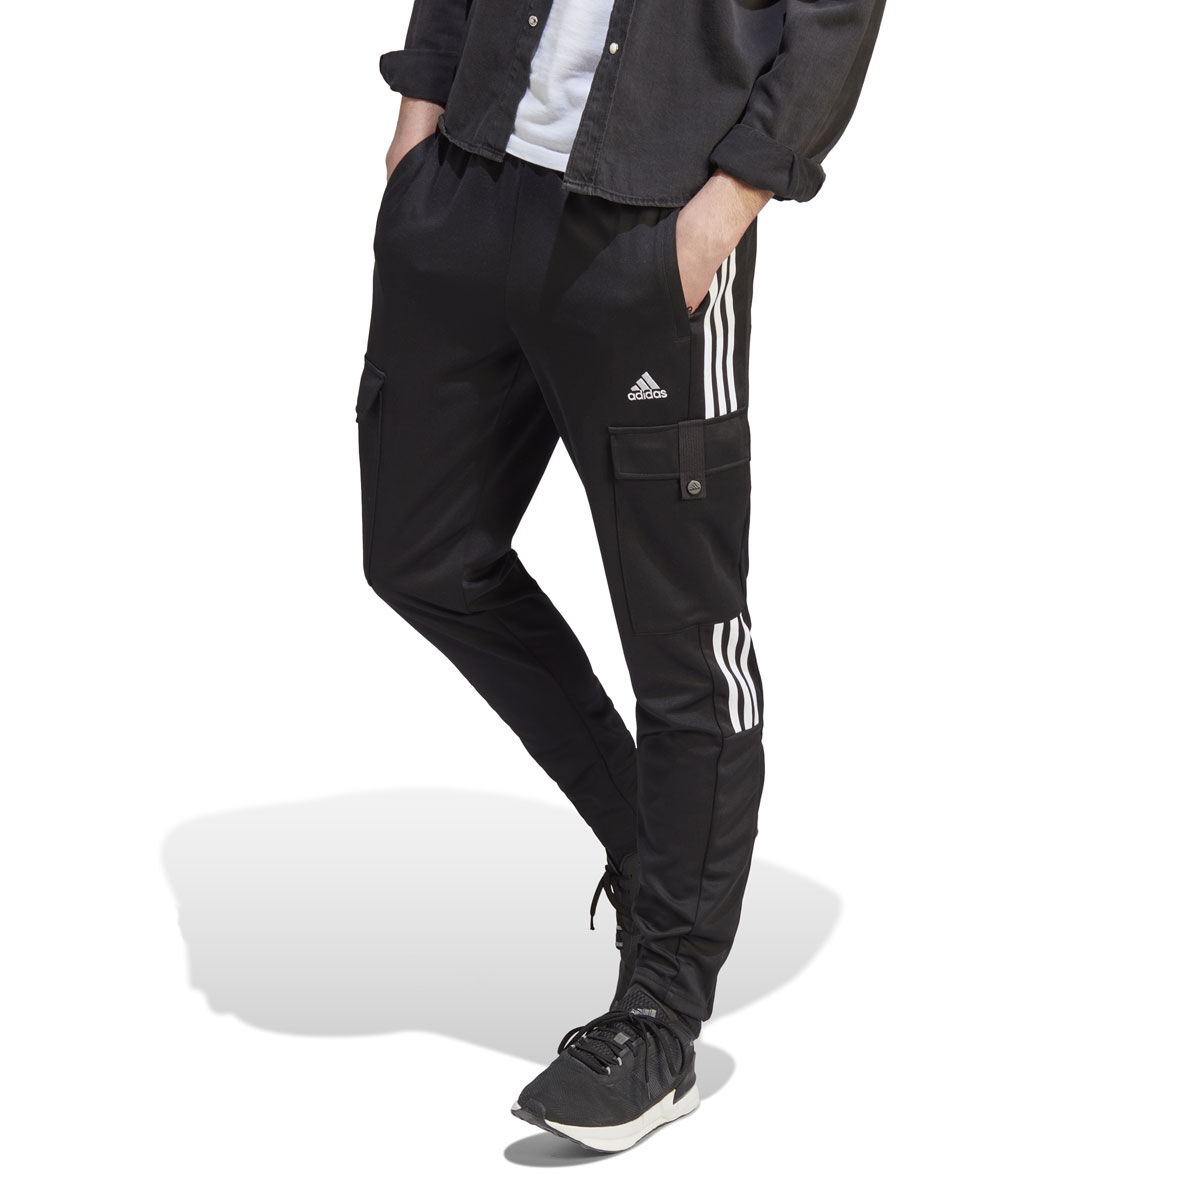 adidas Originals Cargo Track Pants  black UK 10 at Urban Outfitters   Compare  Cabot Circus